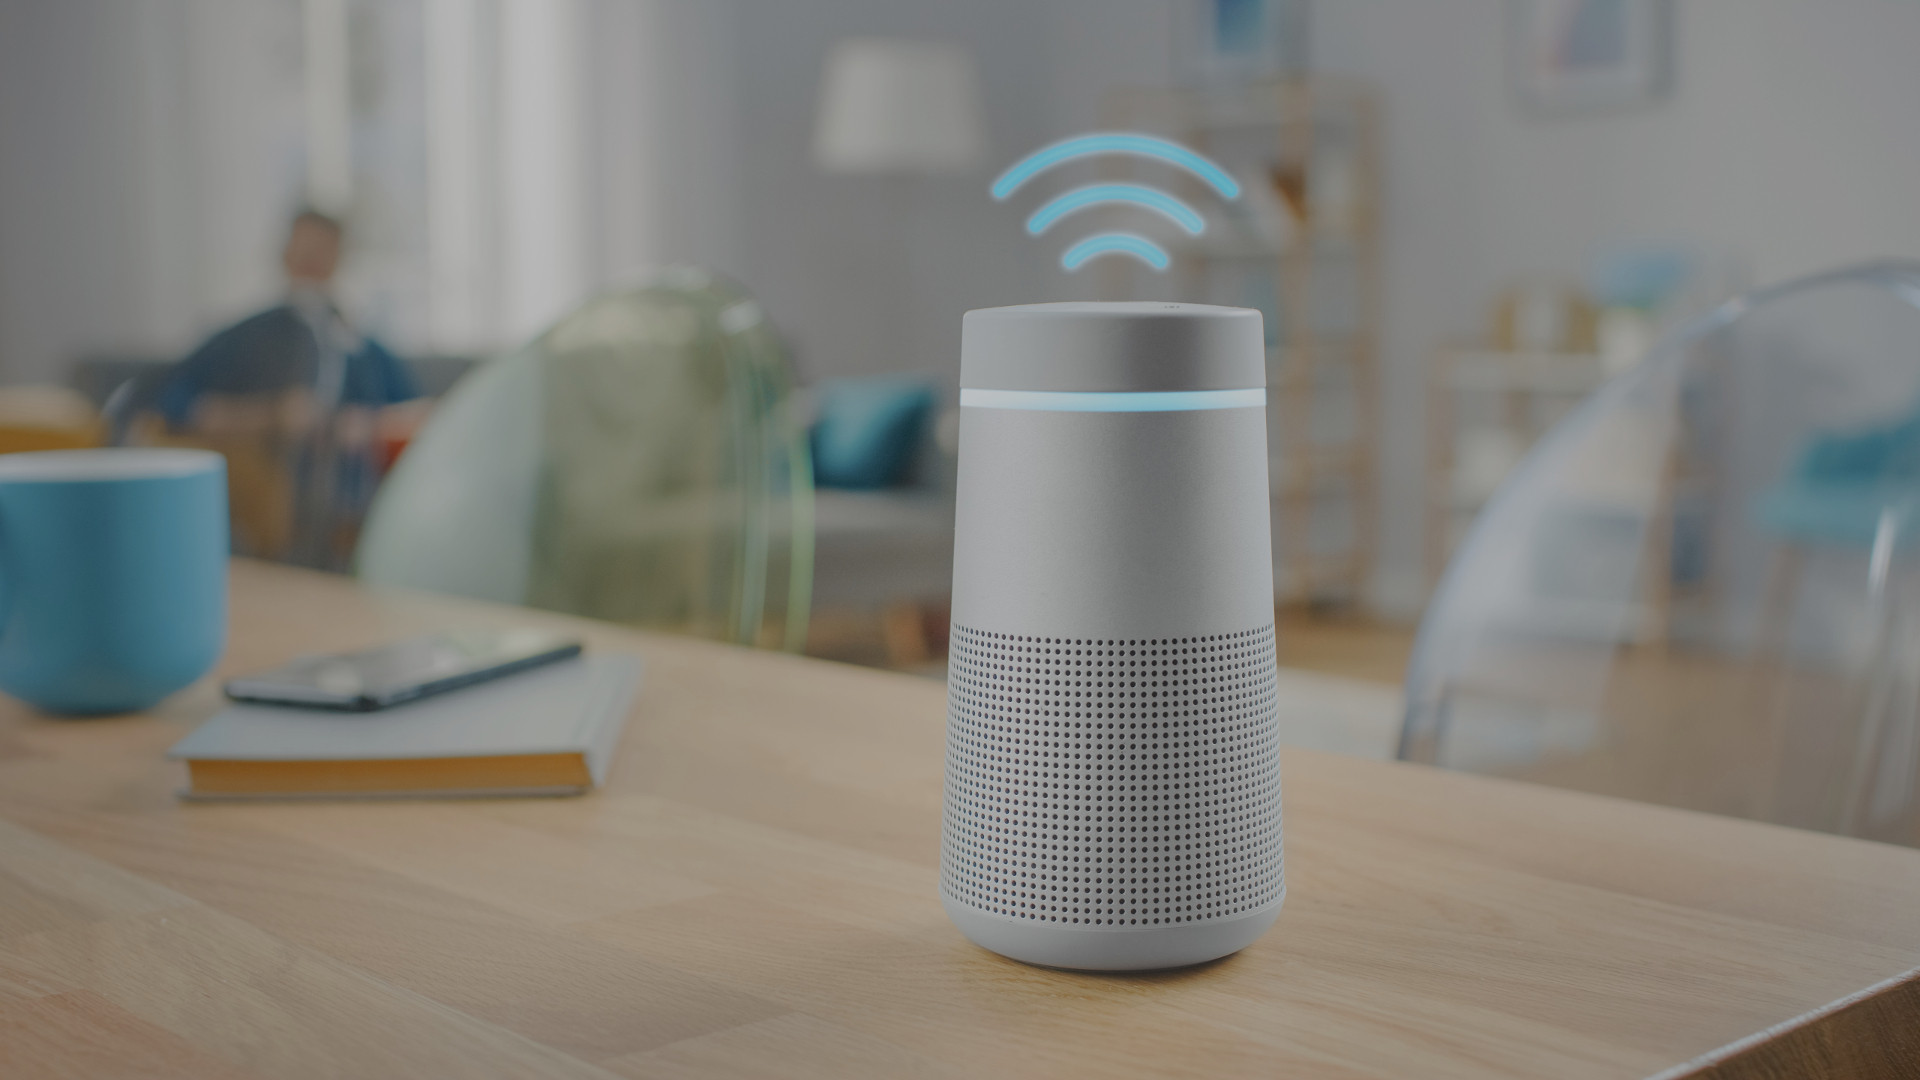 PentaTech Voice Applications for Amazon Alexa and Google Assistant devices